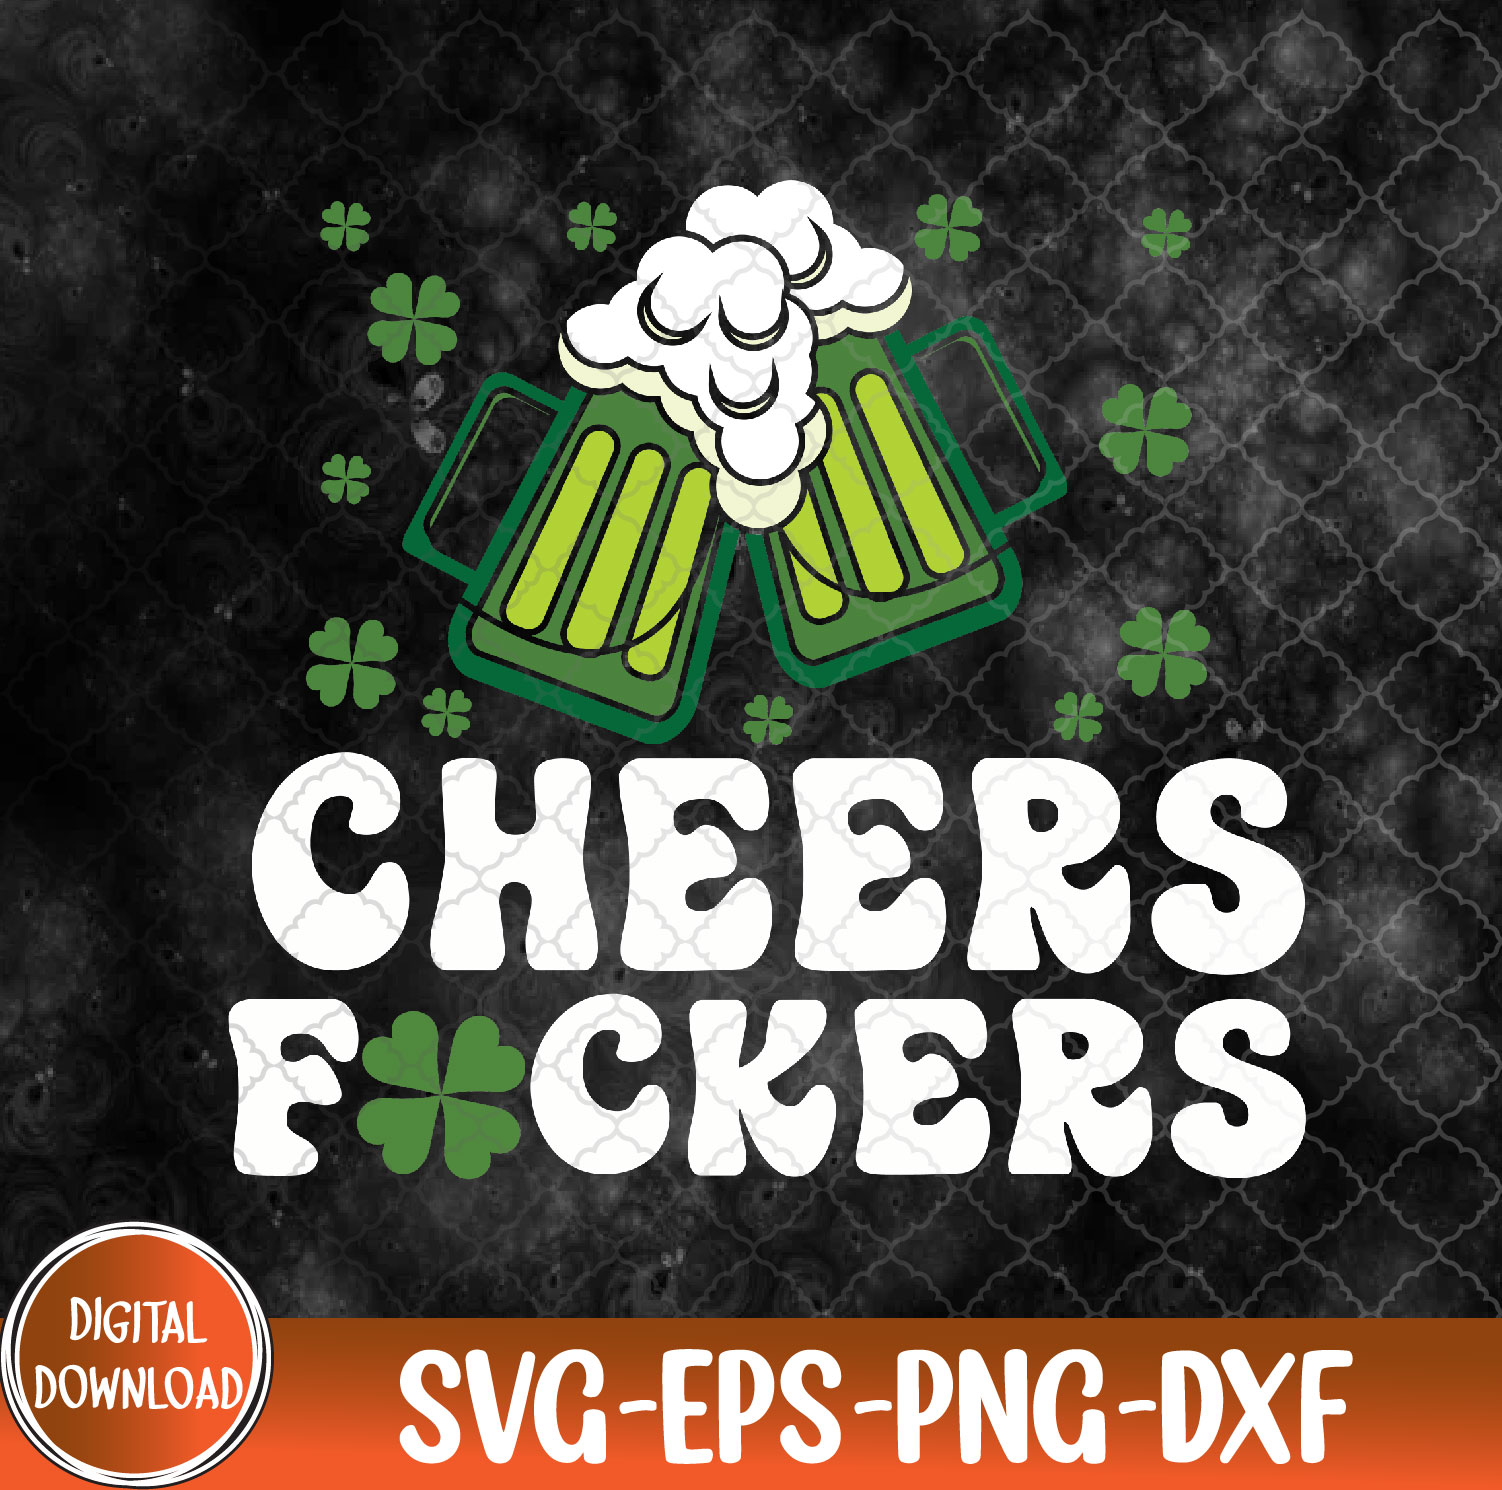 WTMNEW9file 09 198 Cheers Fuckers St Patrick's Day Funny Men Beer Drinking Mugs Svg, Eps, Png, Dxf